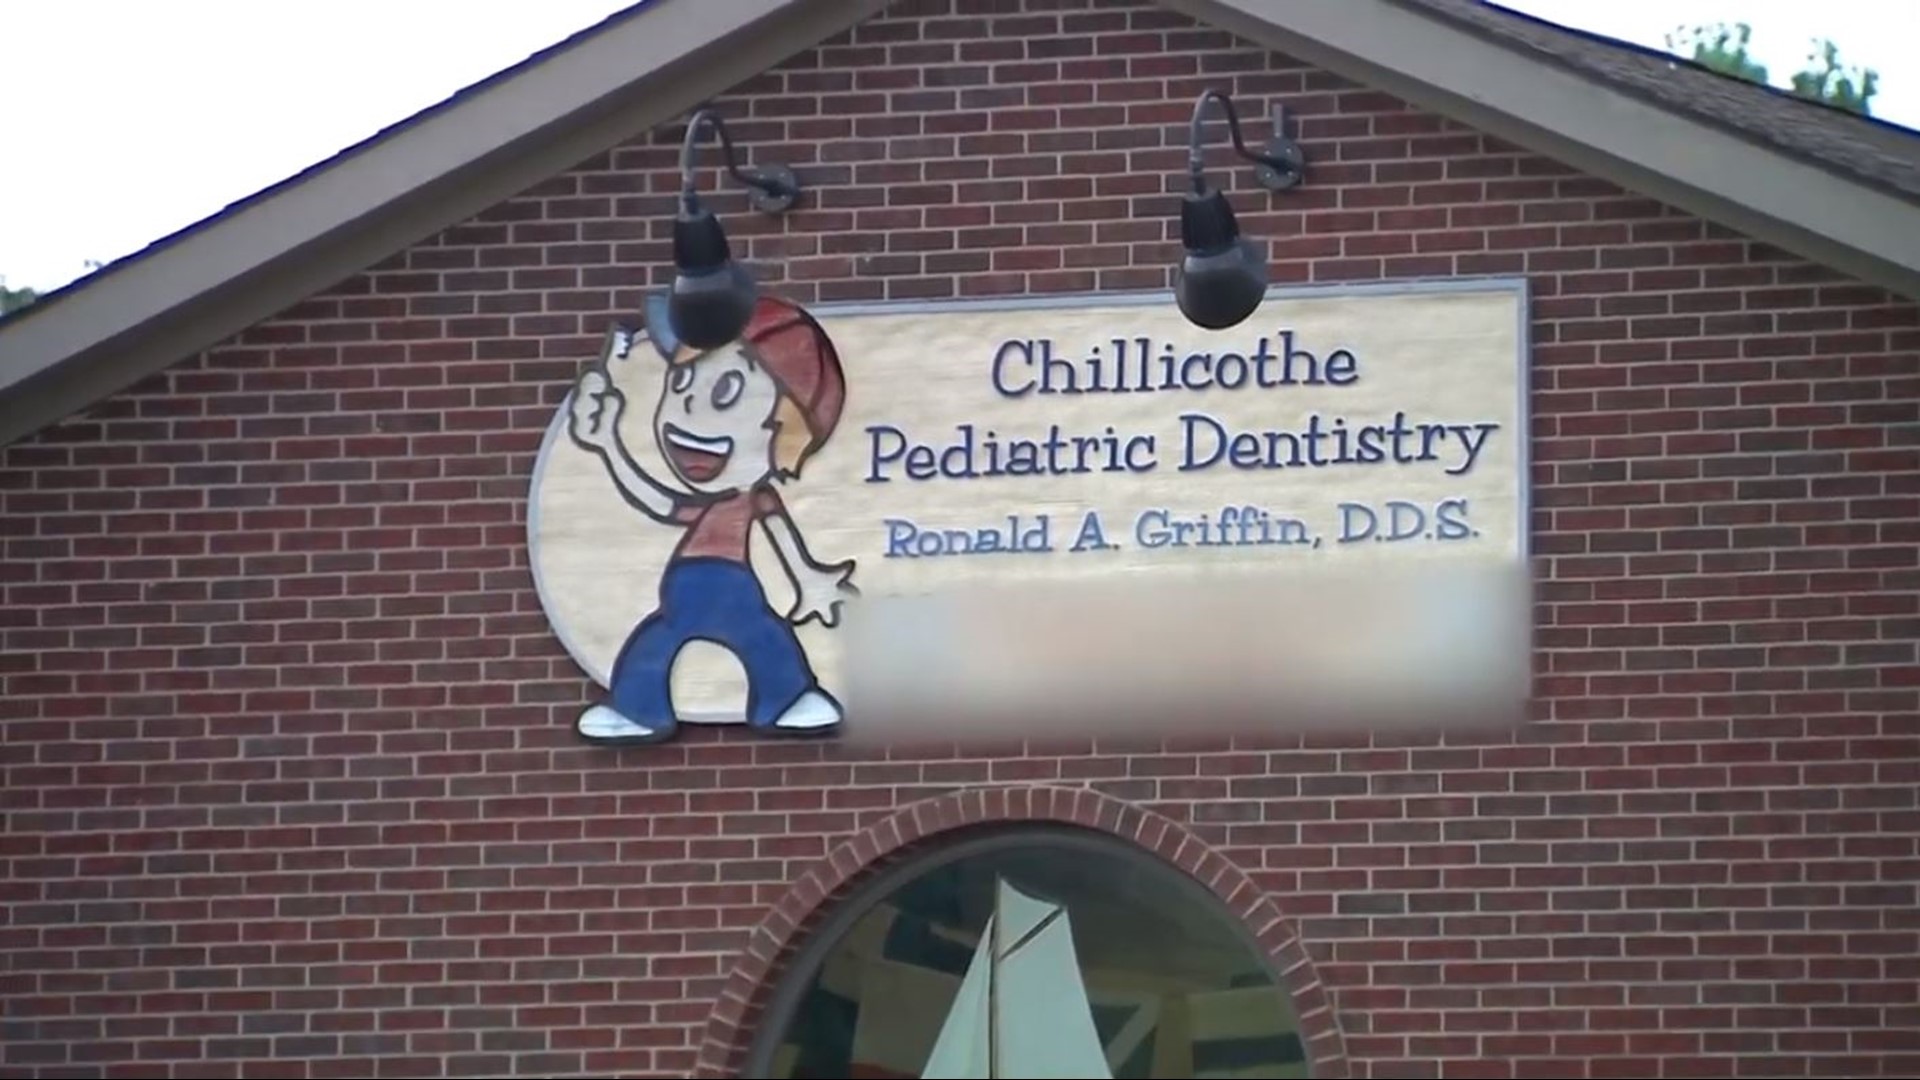 A Chillicothe Dentist is under investigation by police based on allegations that he assaulted children in his care, police records show.